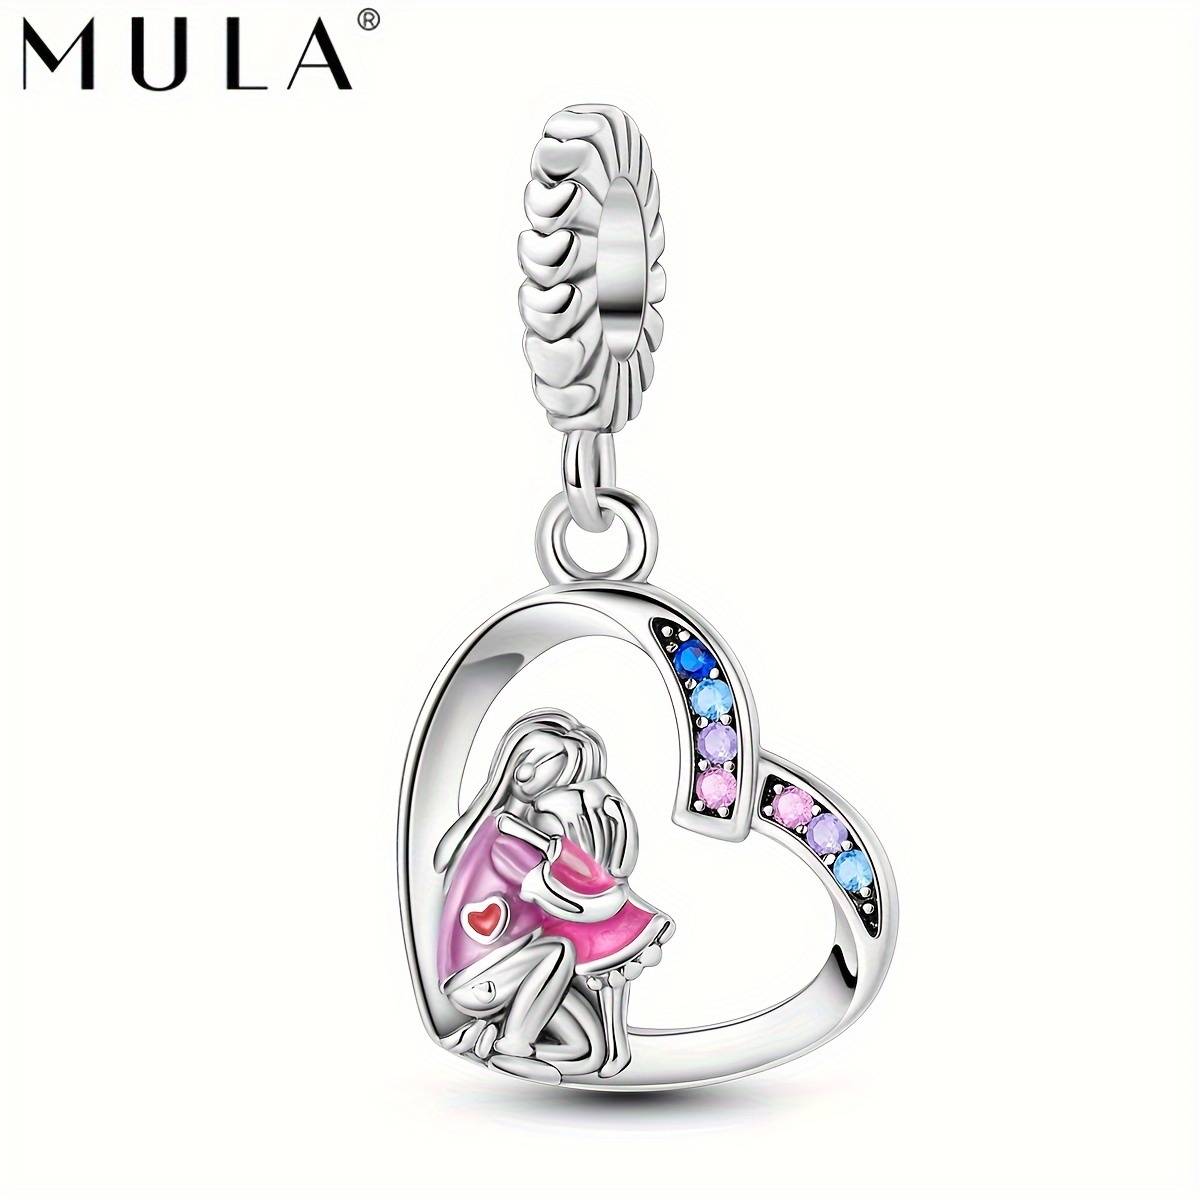 

1pc 925 Silver Plated Warm Love Hug Mom Daughter Hollow Heart Pink Enamel Pendant Beads Charm Fit Original Bracelet Necklace Beads Diy Jewelry Mother's Day Gift